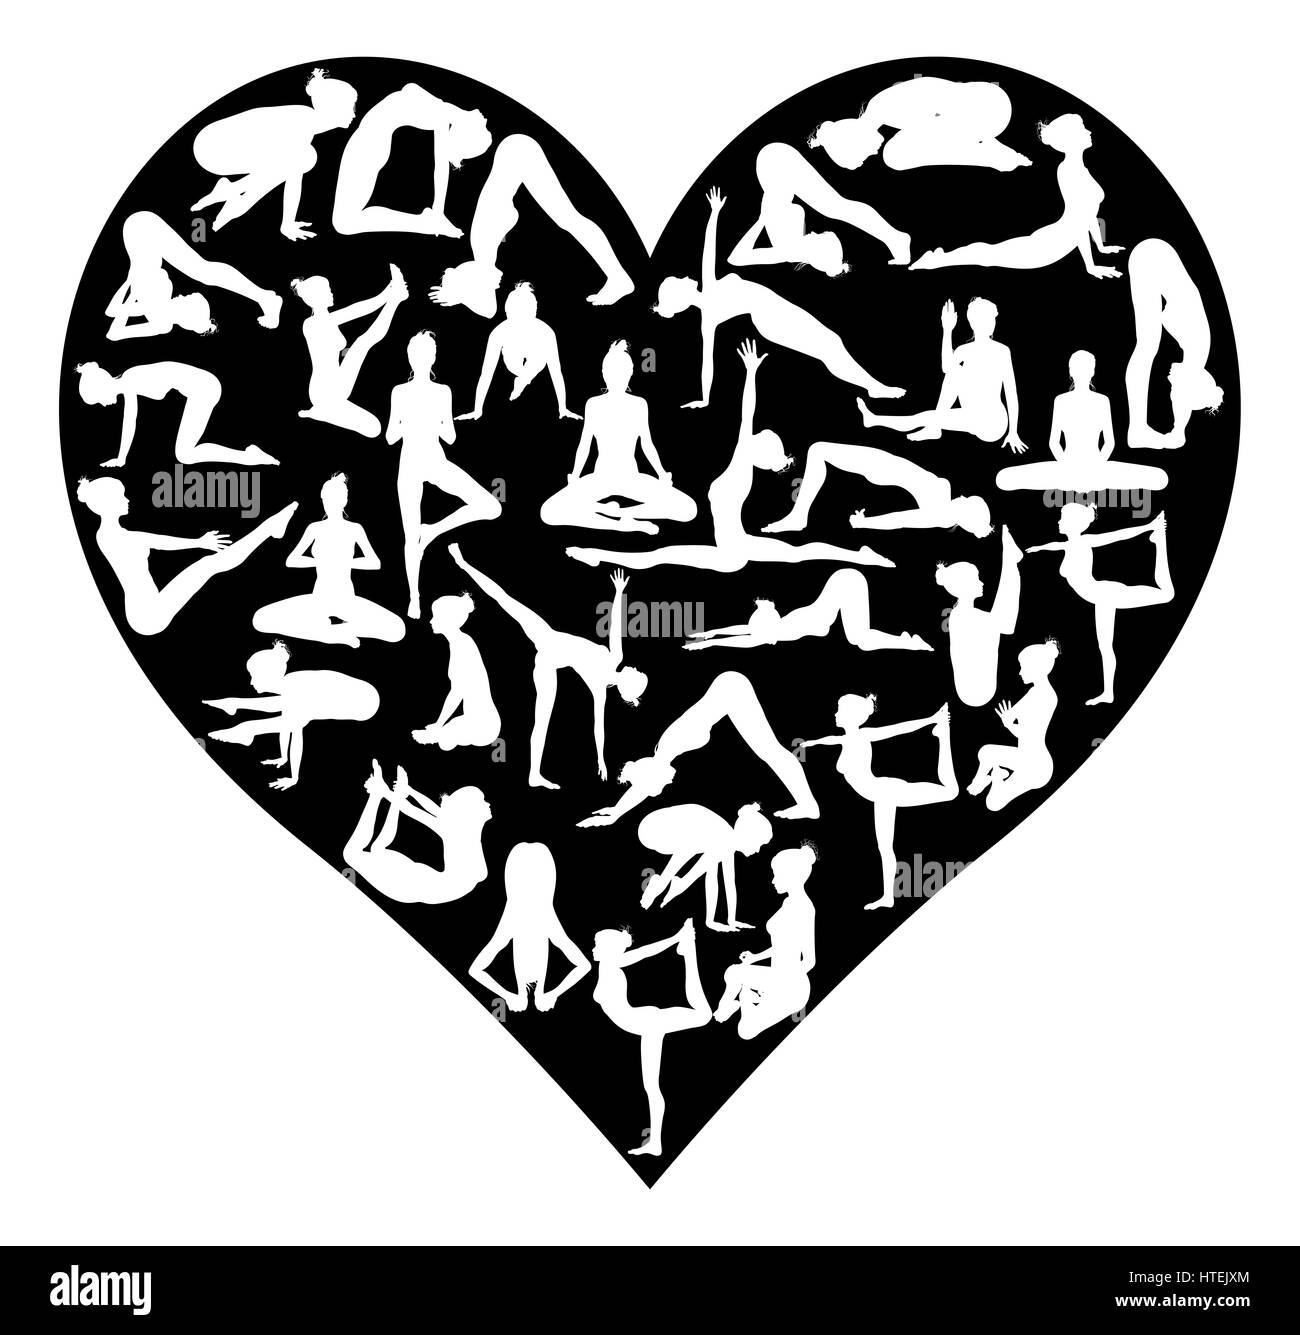 A set of detailed yoga poses and postures silhouettes in a heart shape Stock Photo